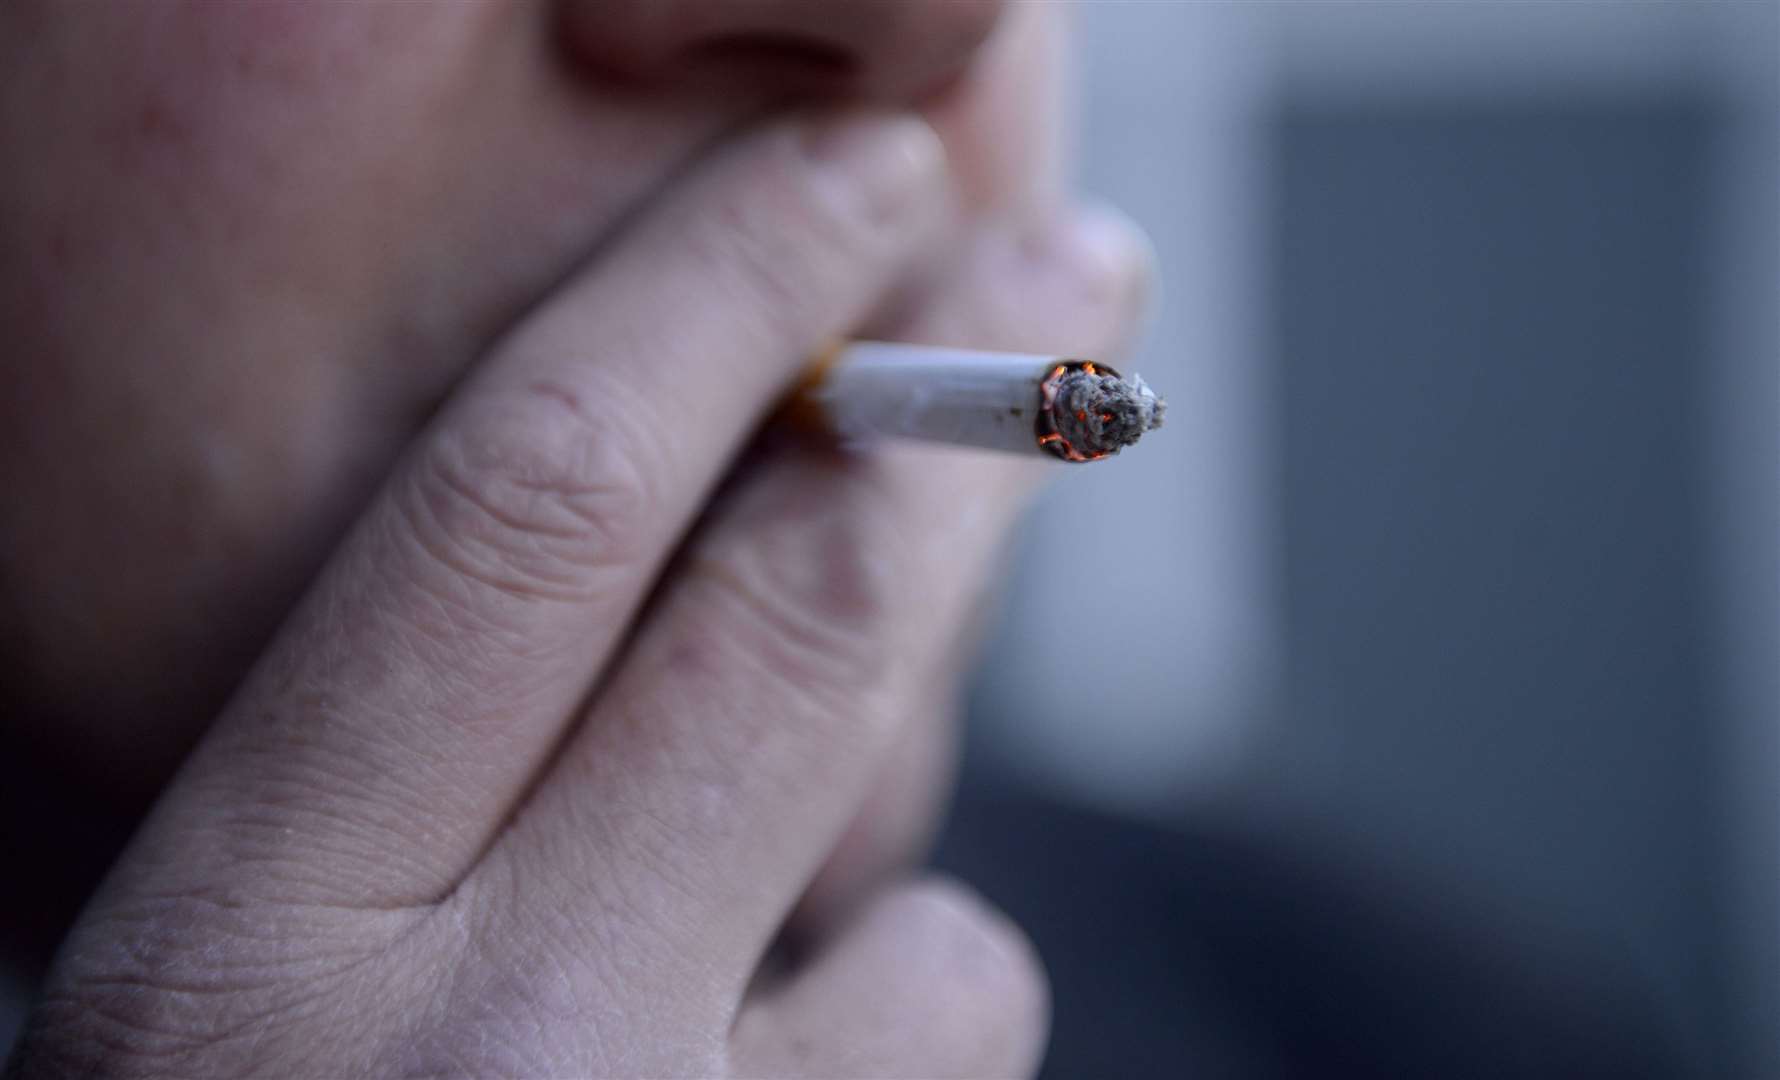 Professor Sir Chris Whitty said he welcomed the “bold report” on ending smoking in England (Jonathan Brady/PA)